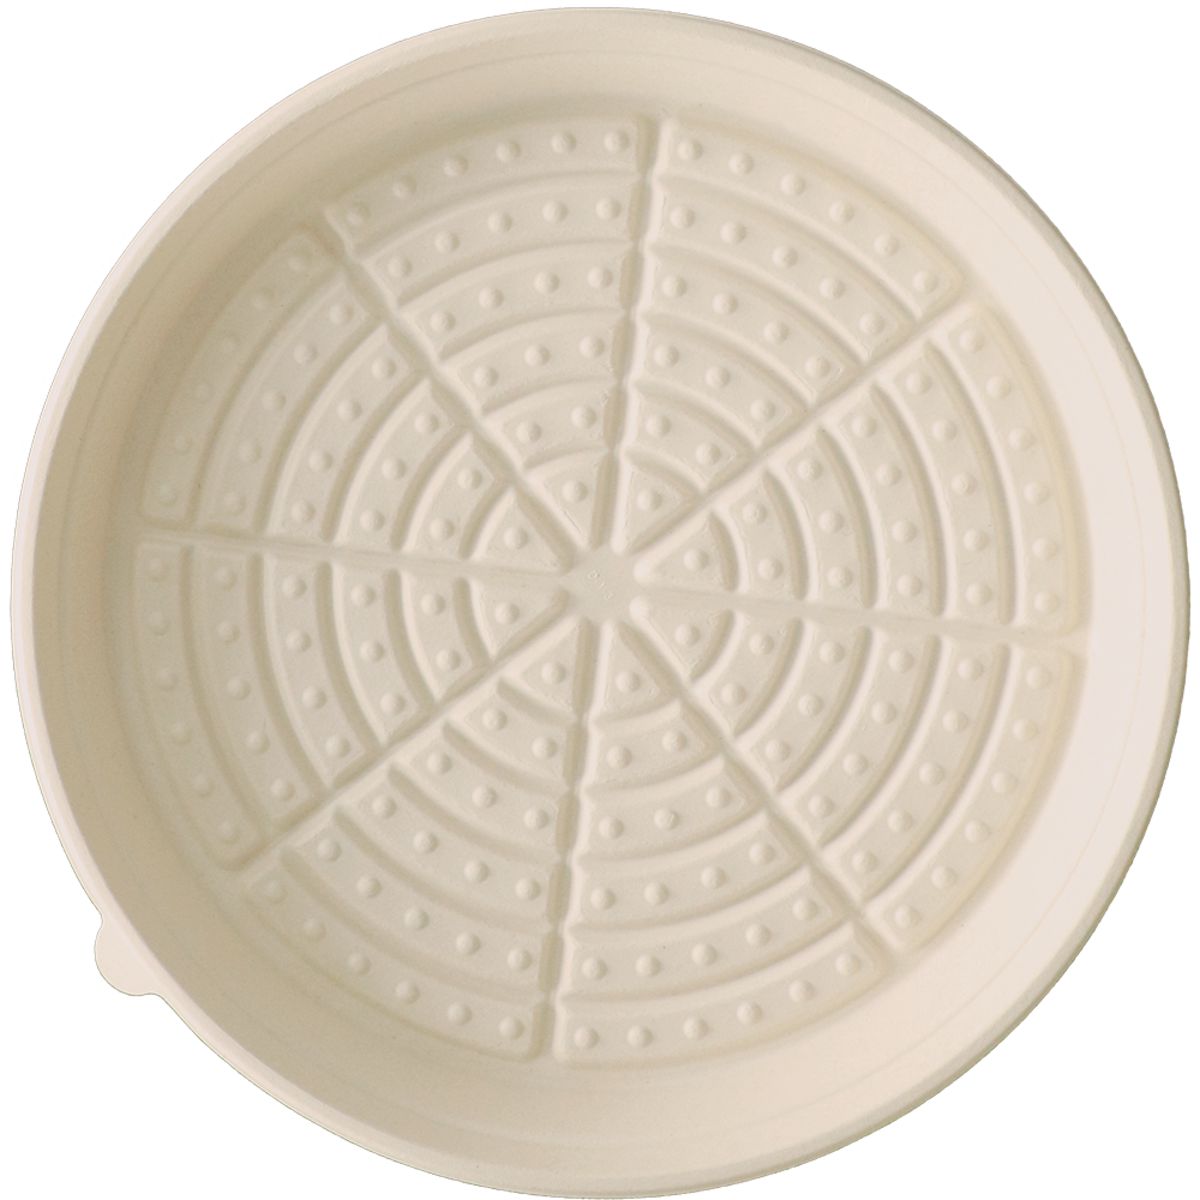 14" PizzaRound Tray - Lid sold separately - 100/case - World Centric